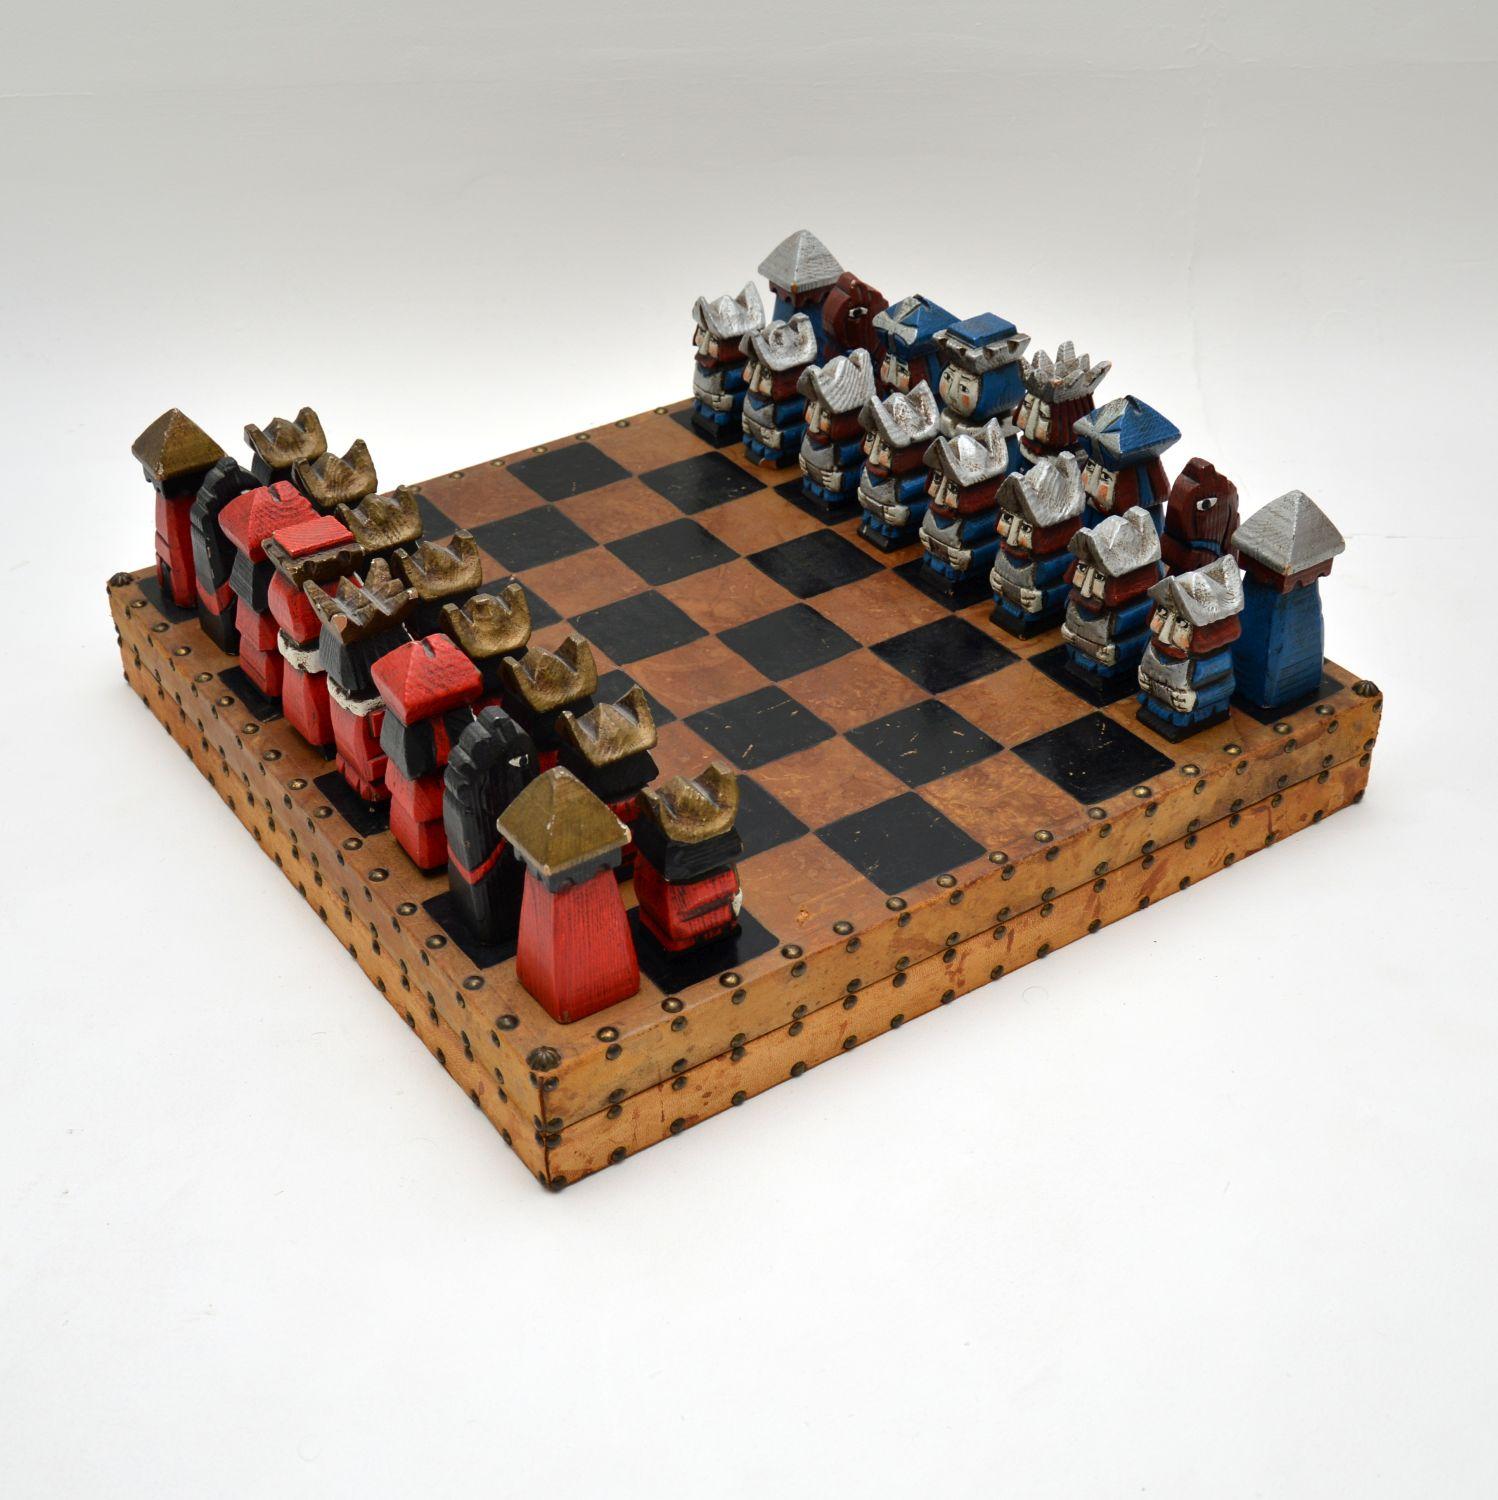 A huge and amazing vintage leather bound chess board with carved wooden figures, probably the most unusual chess set you will see! This was most likely made in continental Europe, it dates from around the 1960’s.

The board is leather bound and